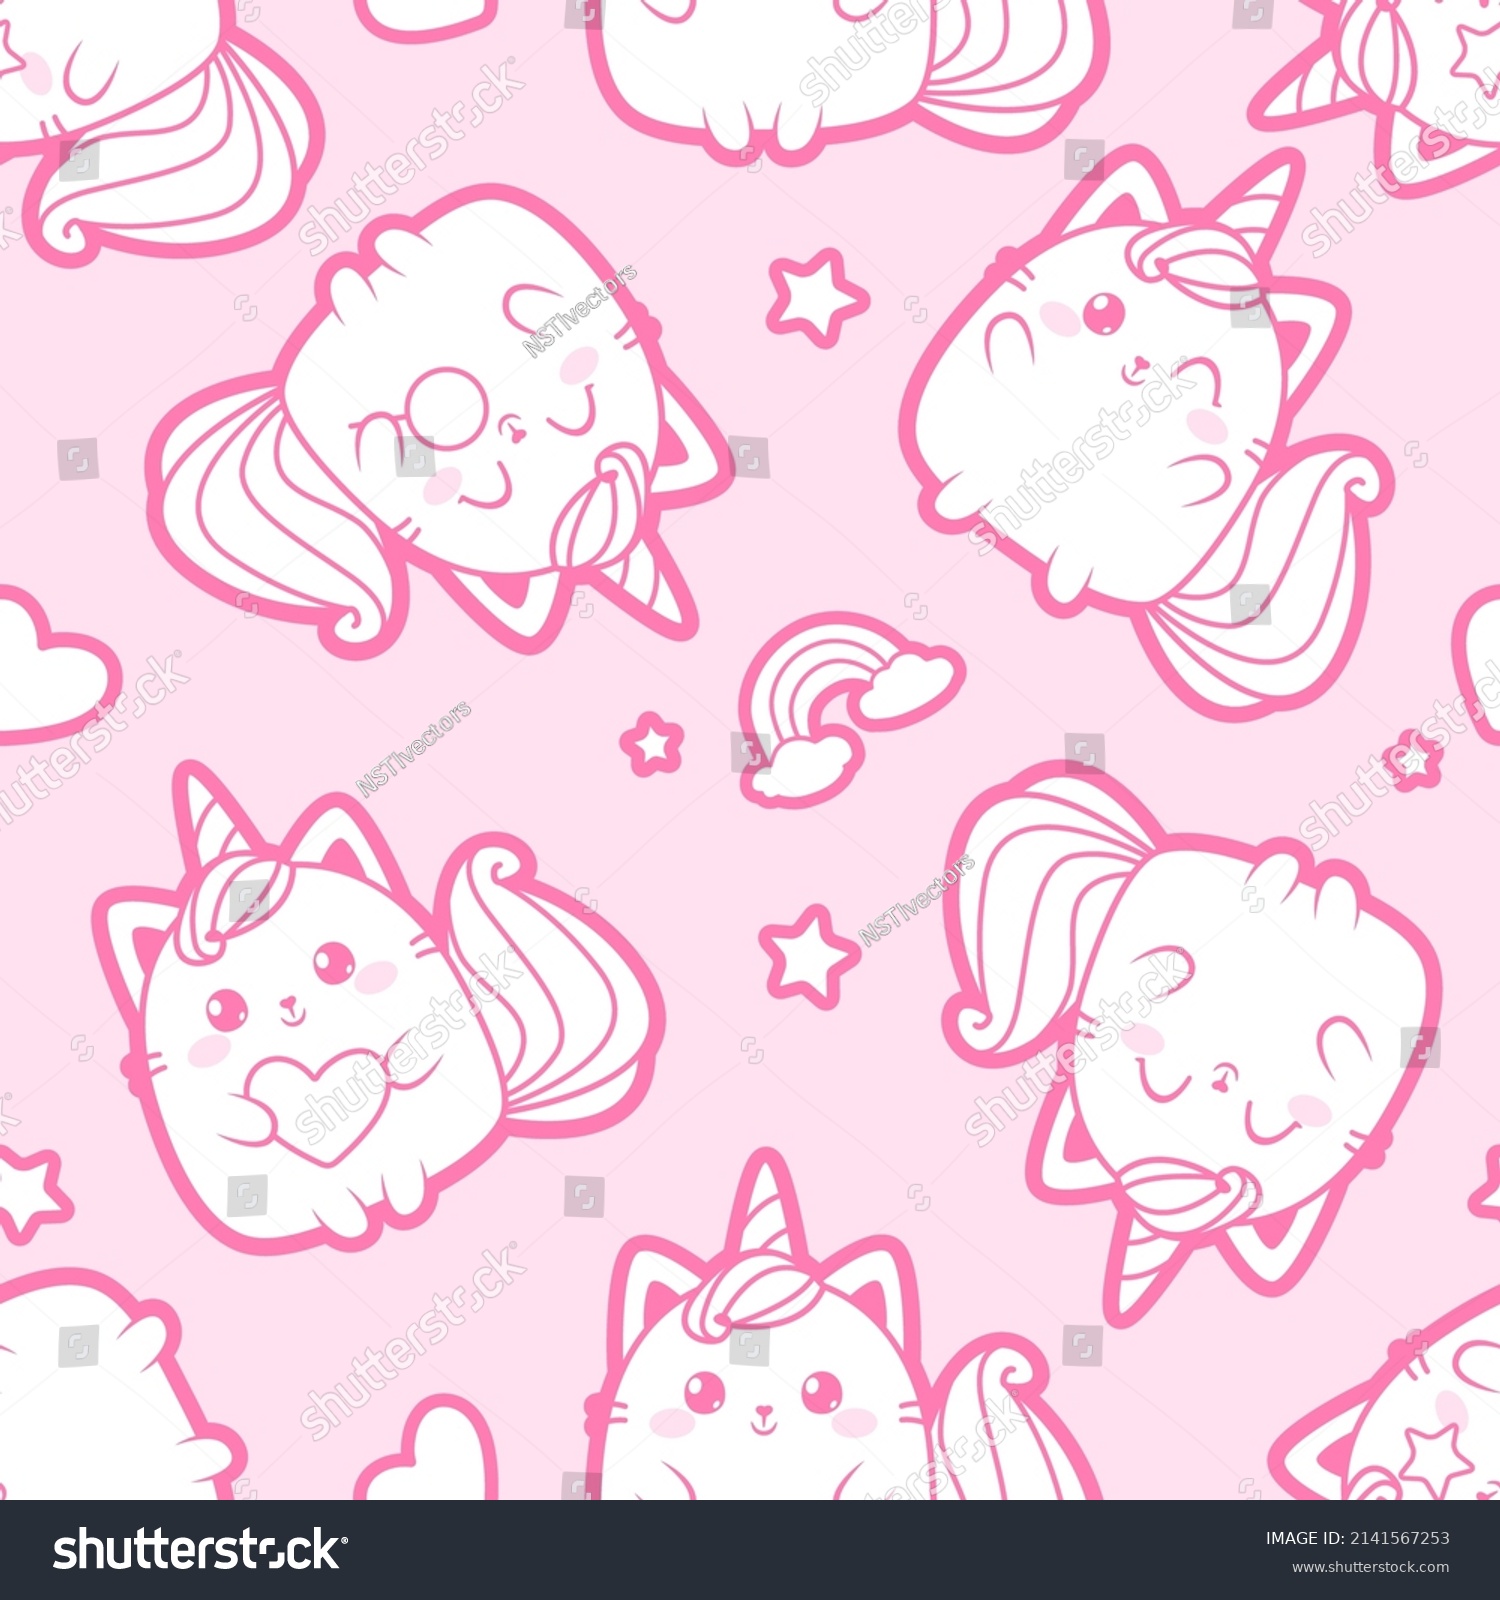 SVG of Cute Baby Cat Caticorn or Kitten Unicorn - pink vector seamless pattern. Kawaii Cat Unicorn with lollipop. Isolated vector illustration for kids design prints, posters, t-shirts, stickers svg